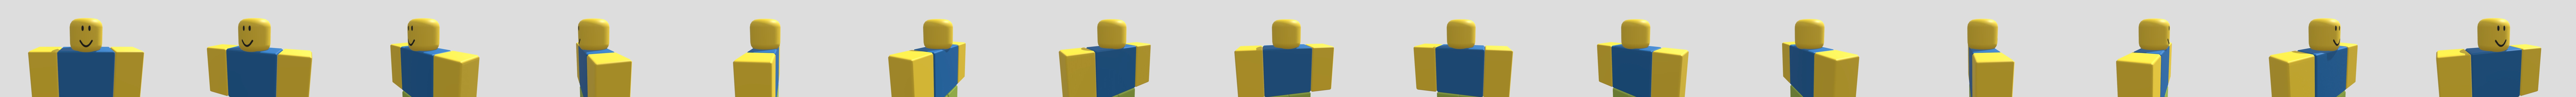 roblox noob - 3D model by 0Pblake on Thangs